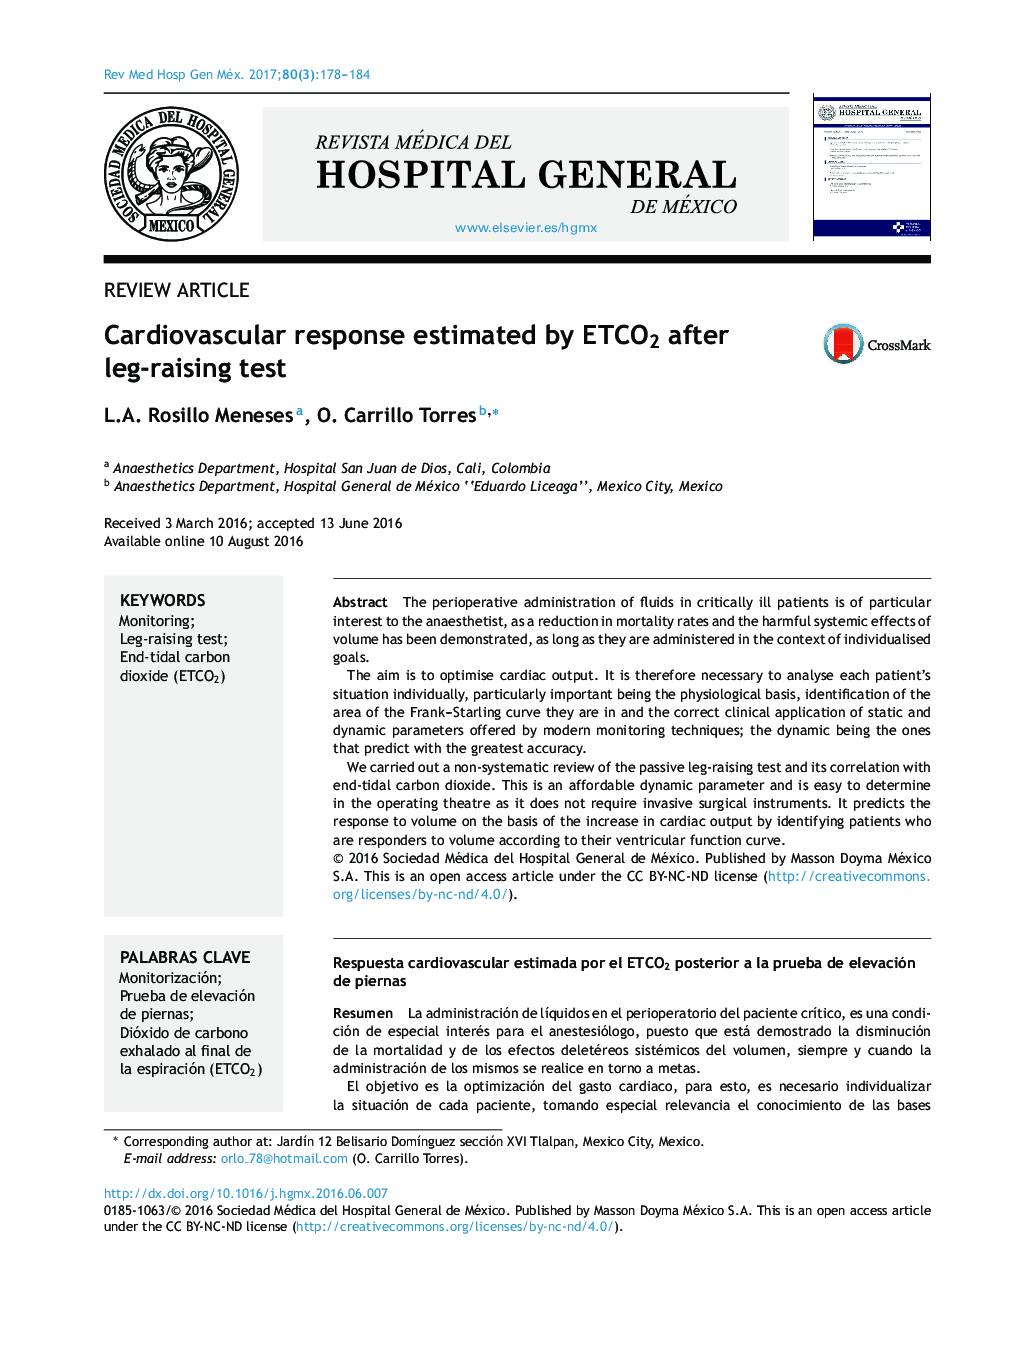 Cardiovascular response estimated by ETCO2 after leg-raising test